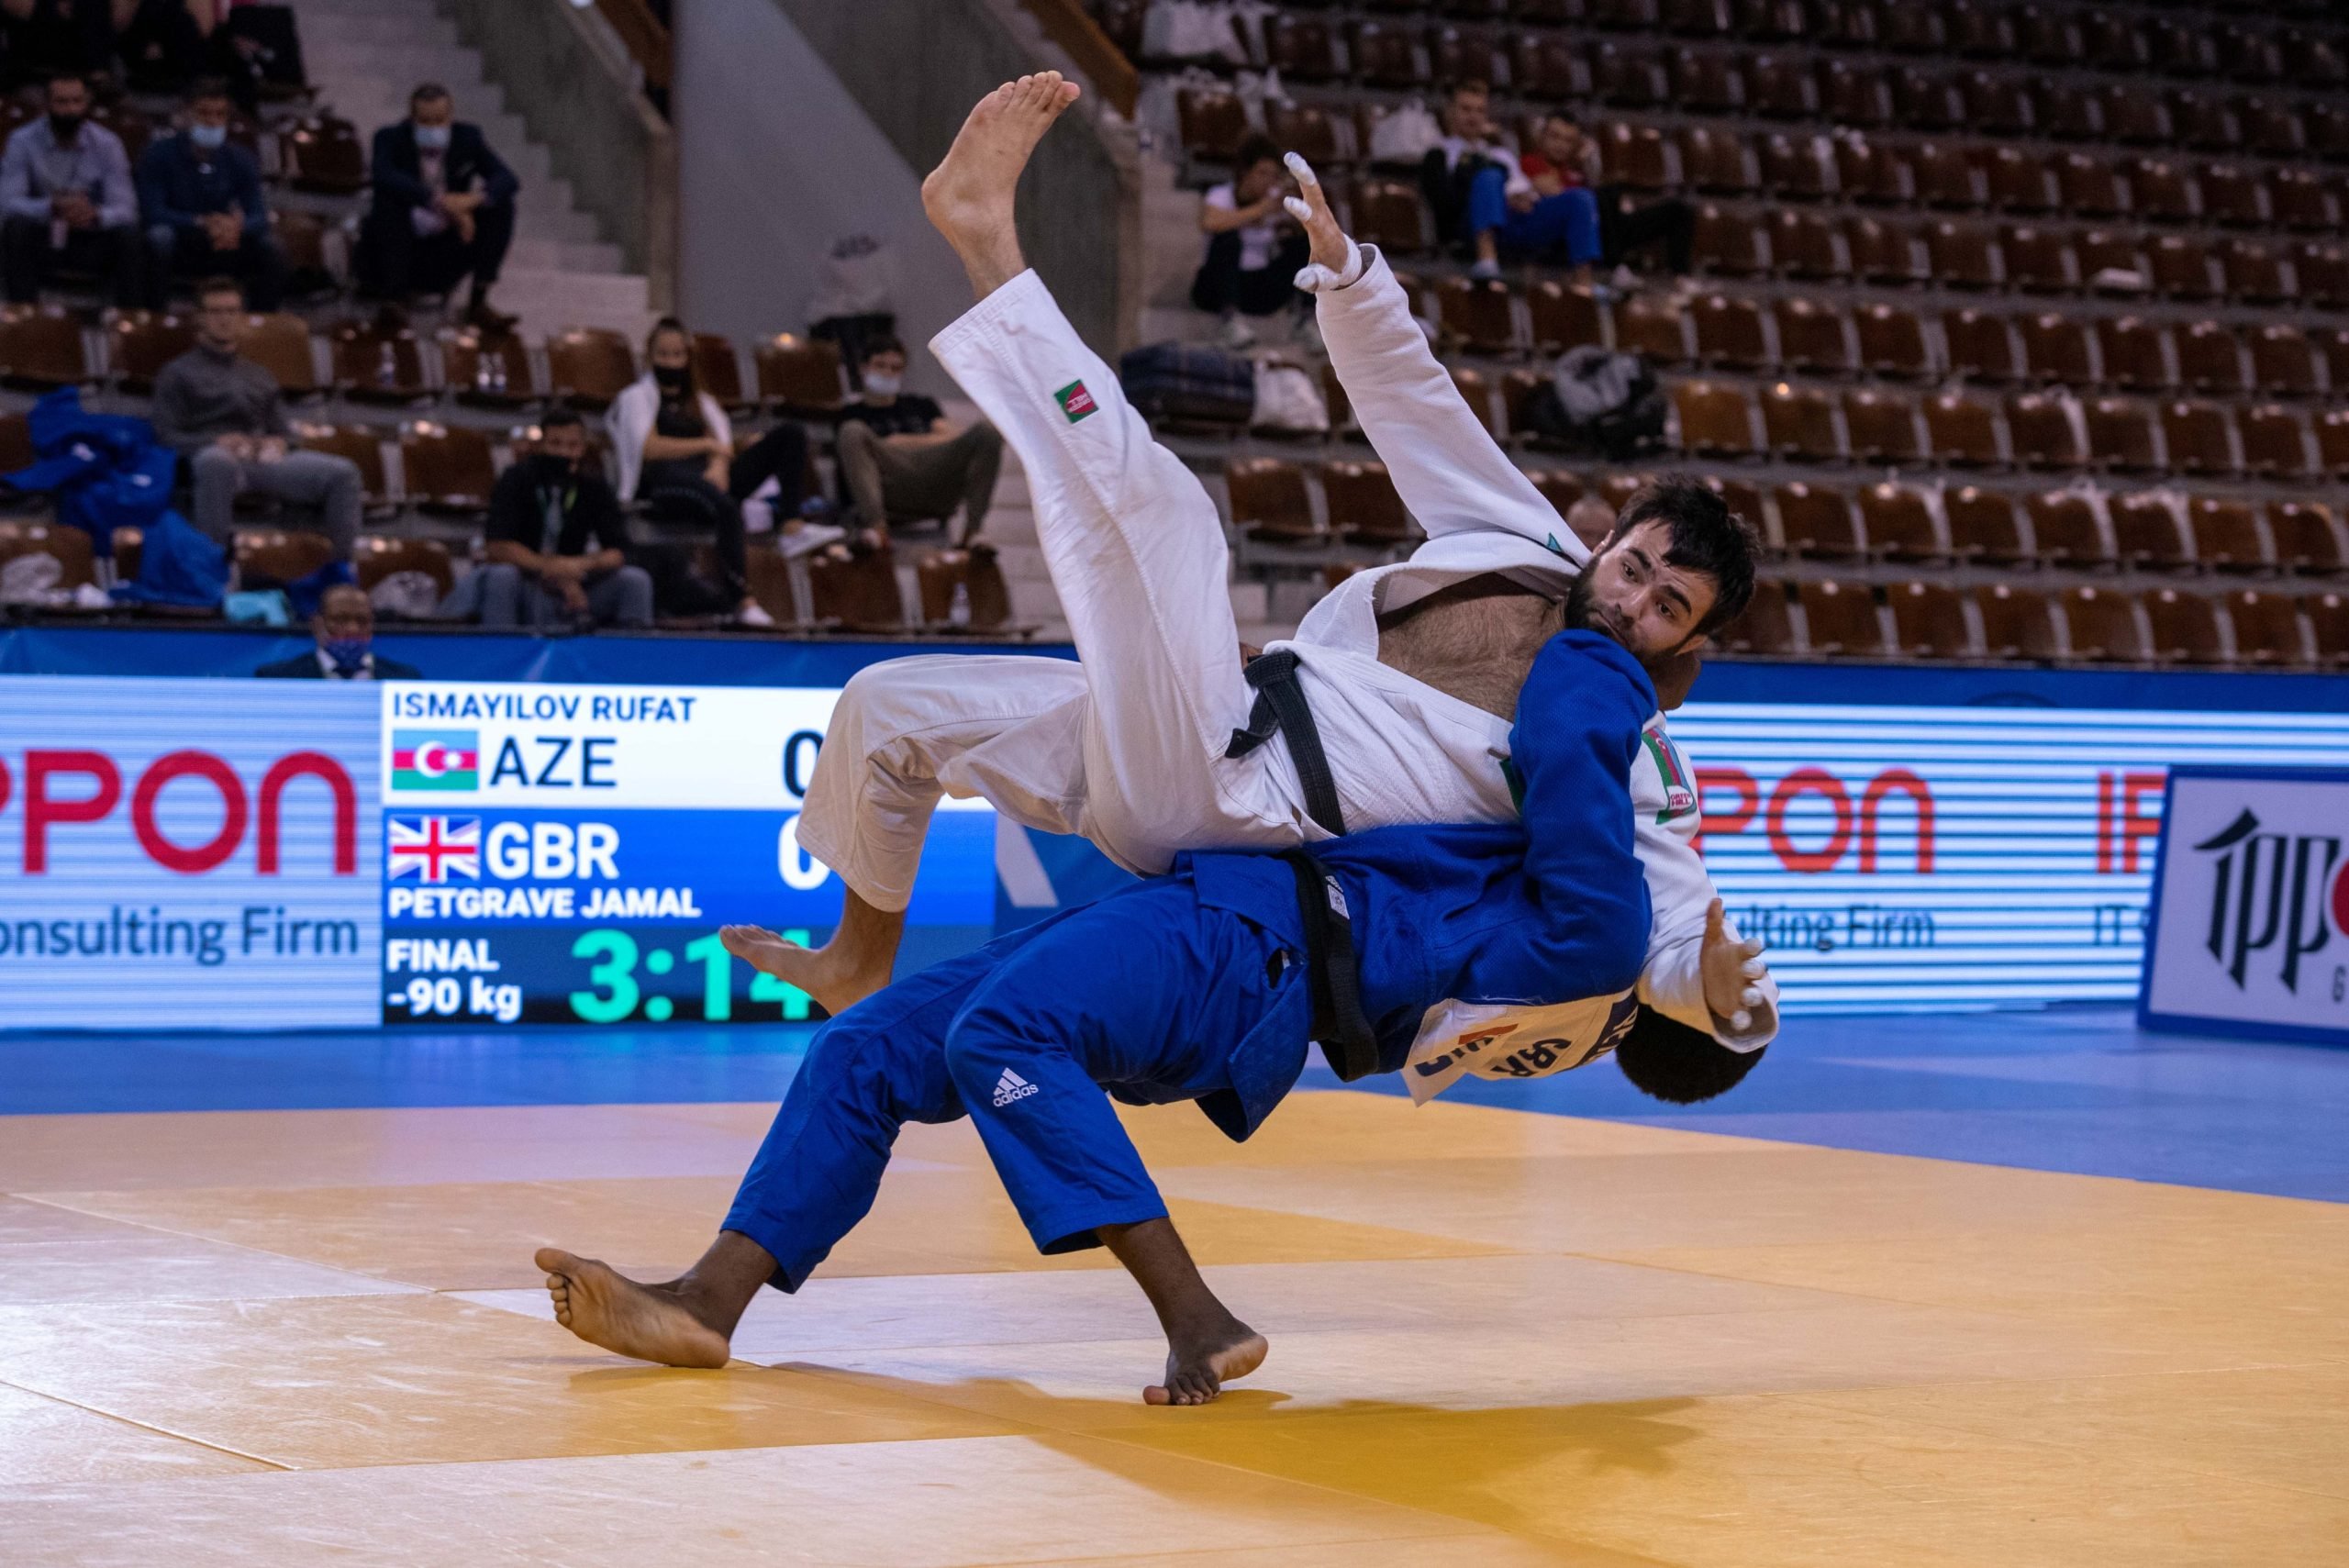 DUBROVNIK SHOWED GREAT JUDO AND A LOT OF EMOTIONS